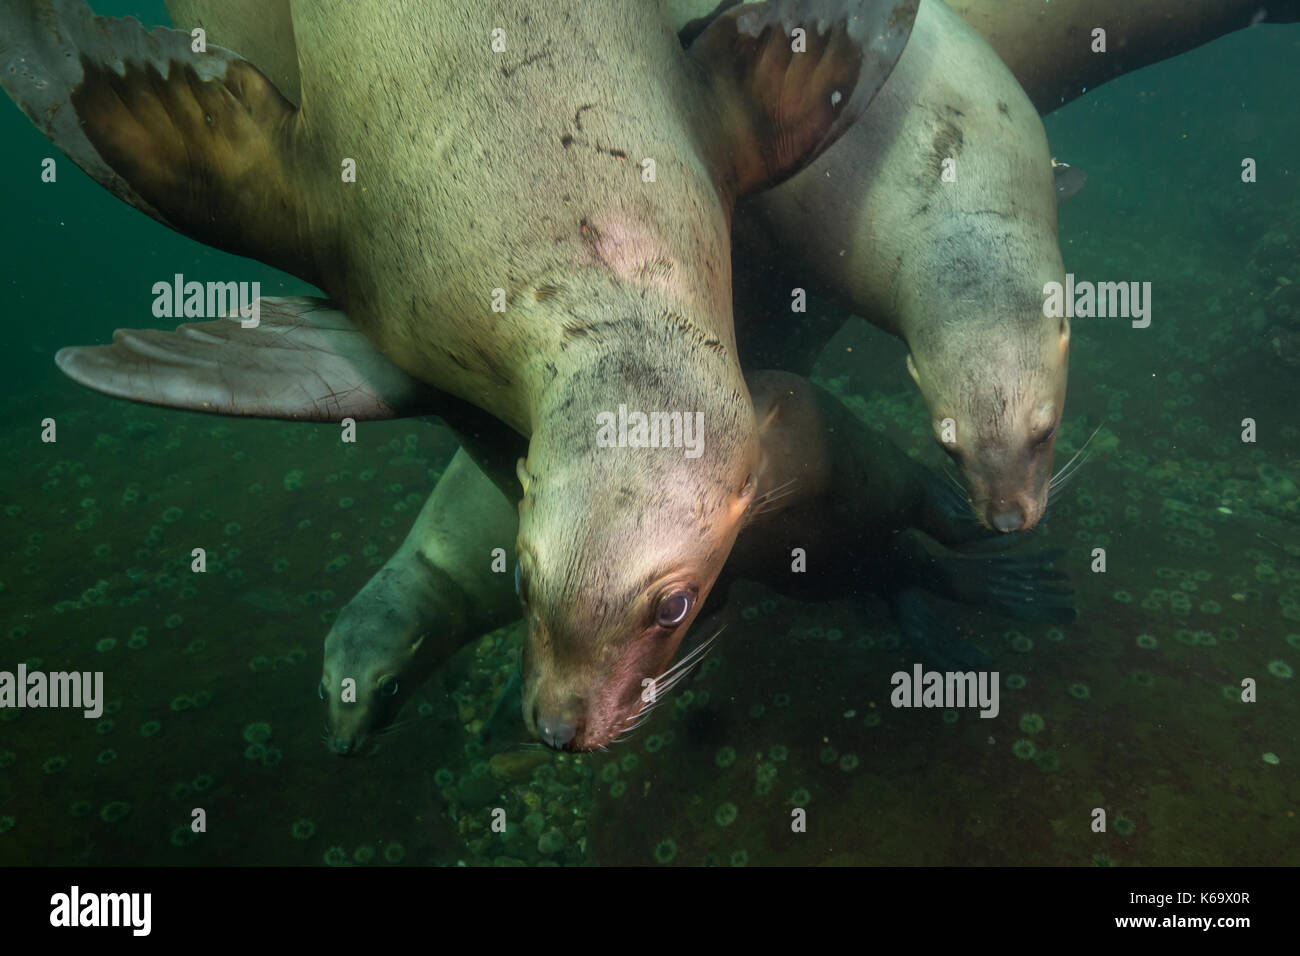 A close up picture of a group of Sea Lions swimming underwater. Picture taken in Pacific Ocean near Honby Island, British Columbia, Canada. Stock Photo